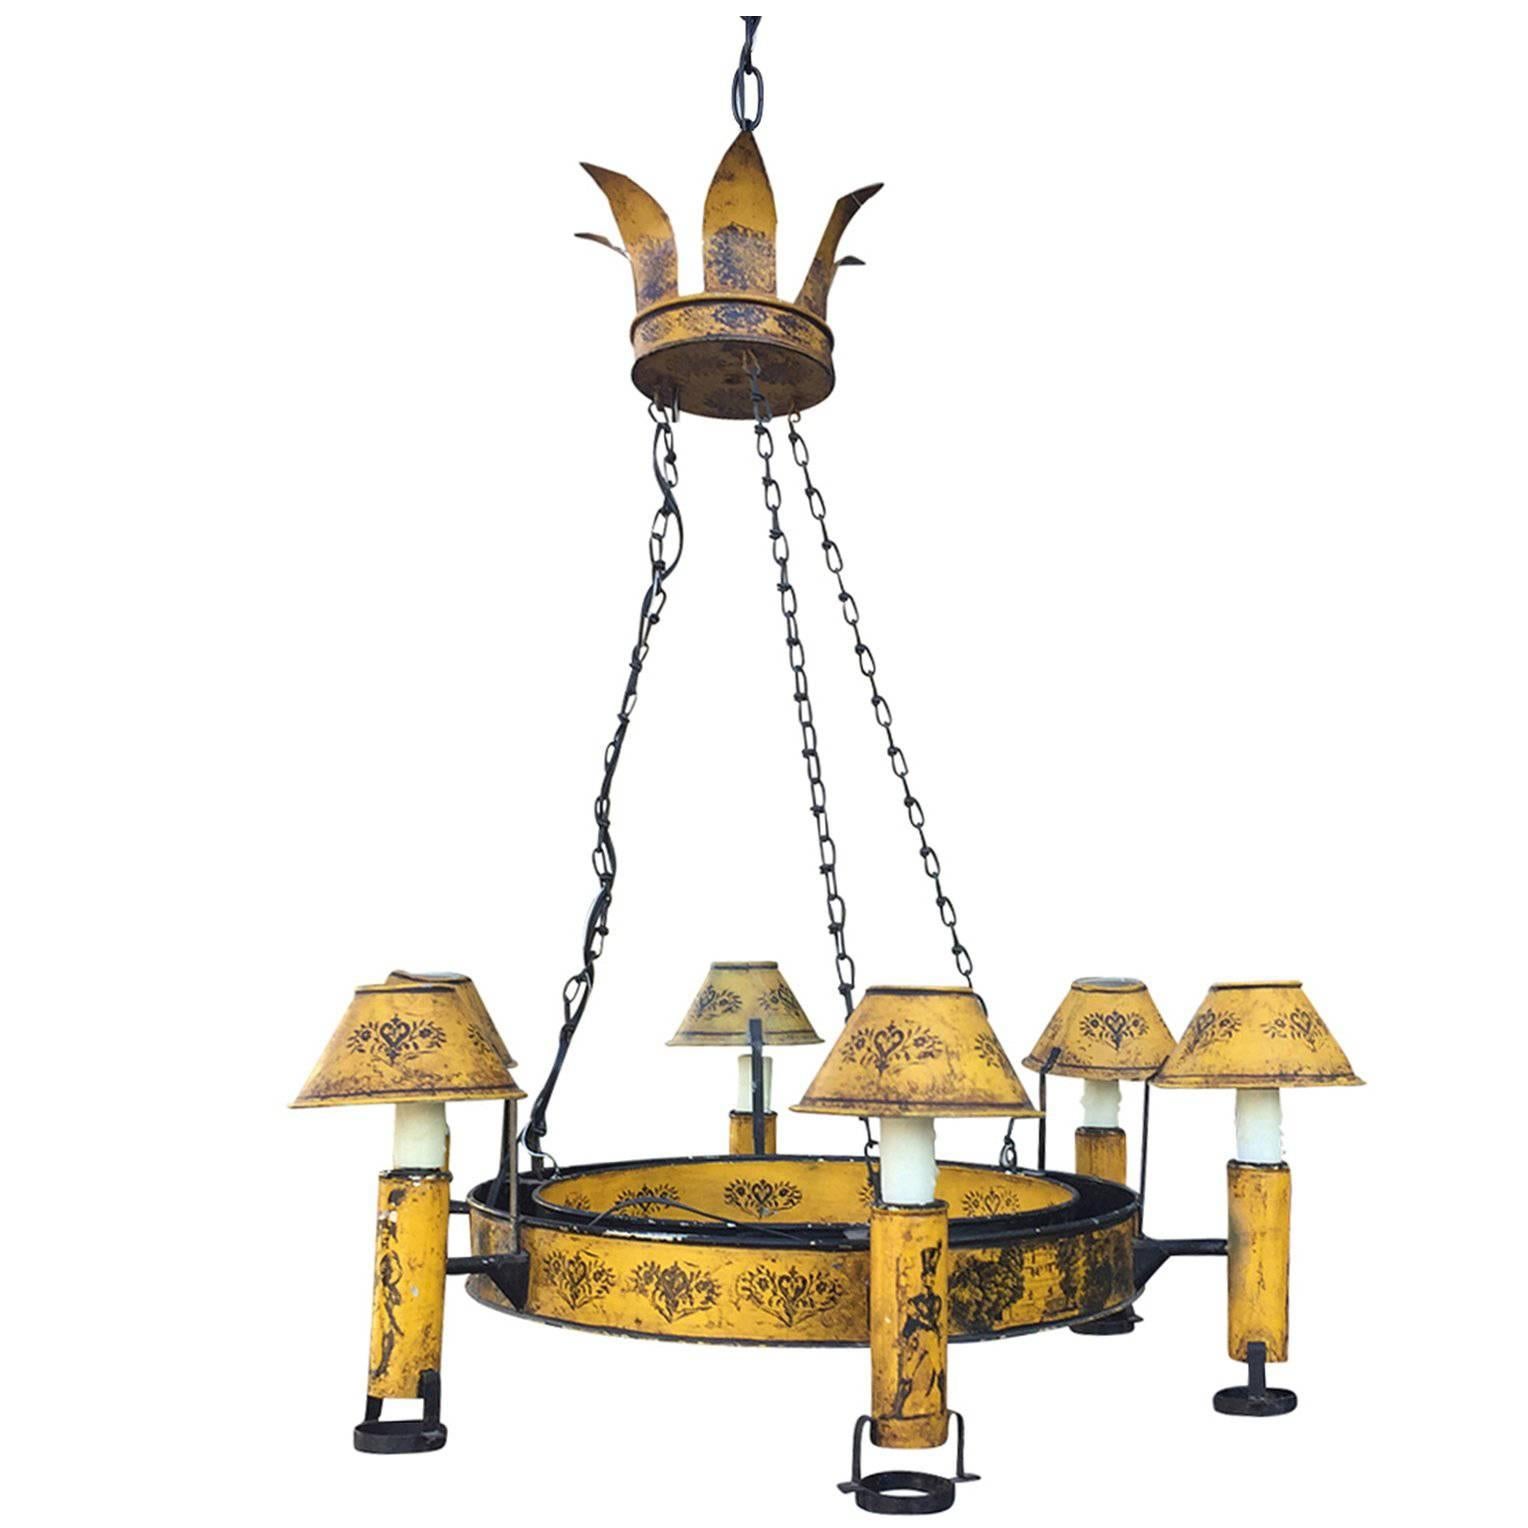 Mid-20th Century Italian Yellow Tole Transfer Chandelier For Sale